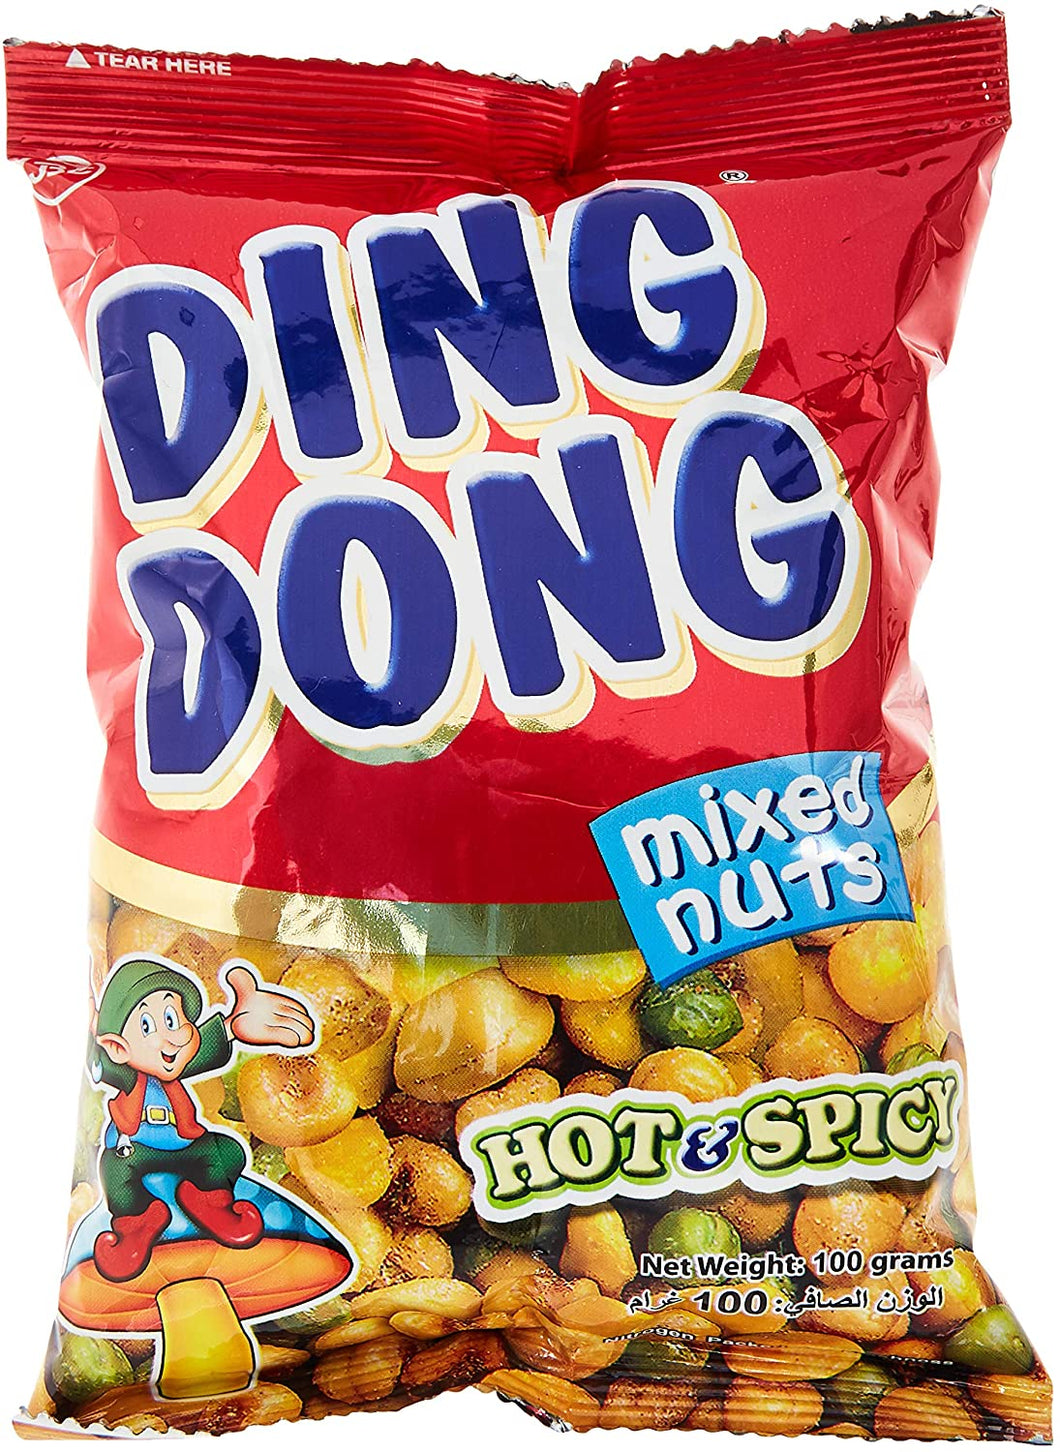 DING DONG SNACK MIX - SPICY NUTS